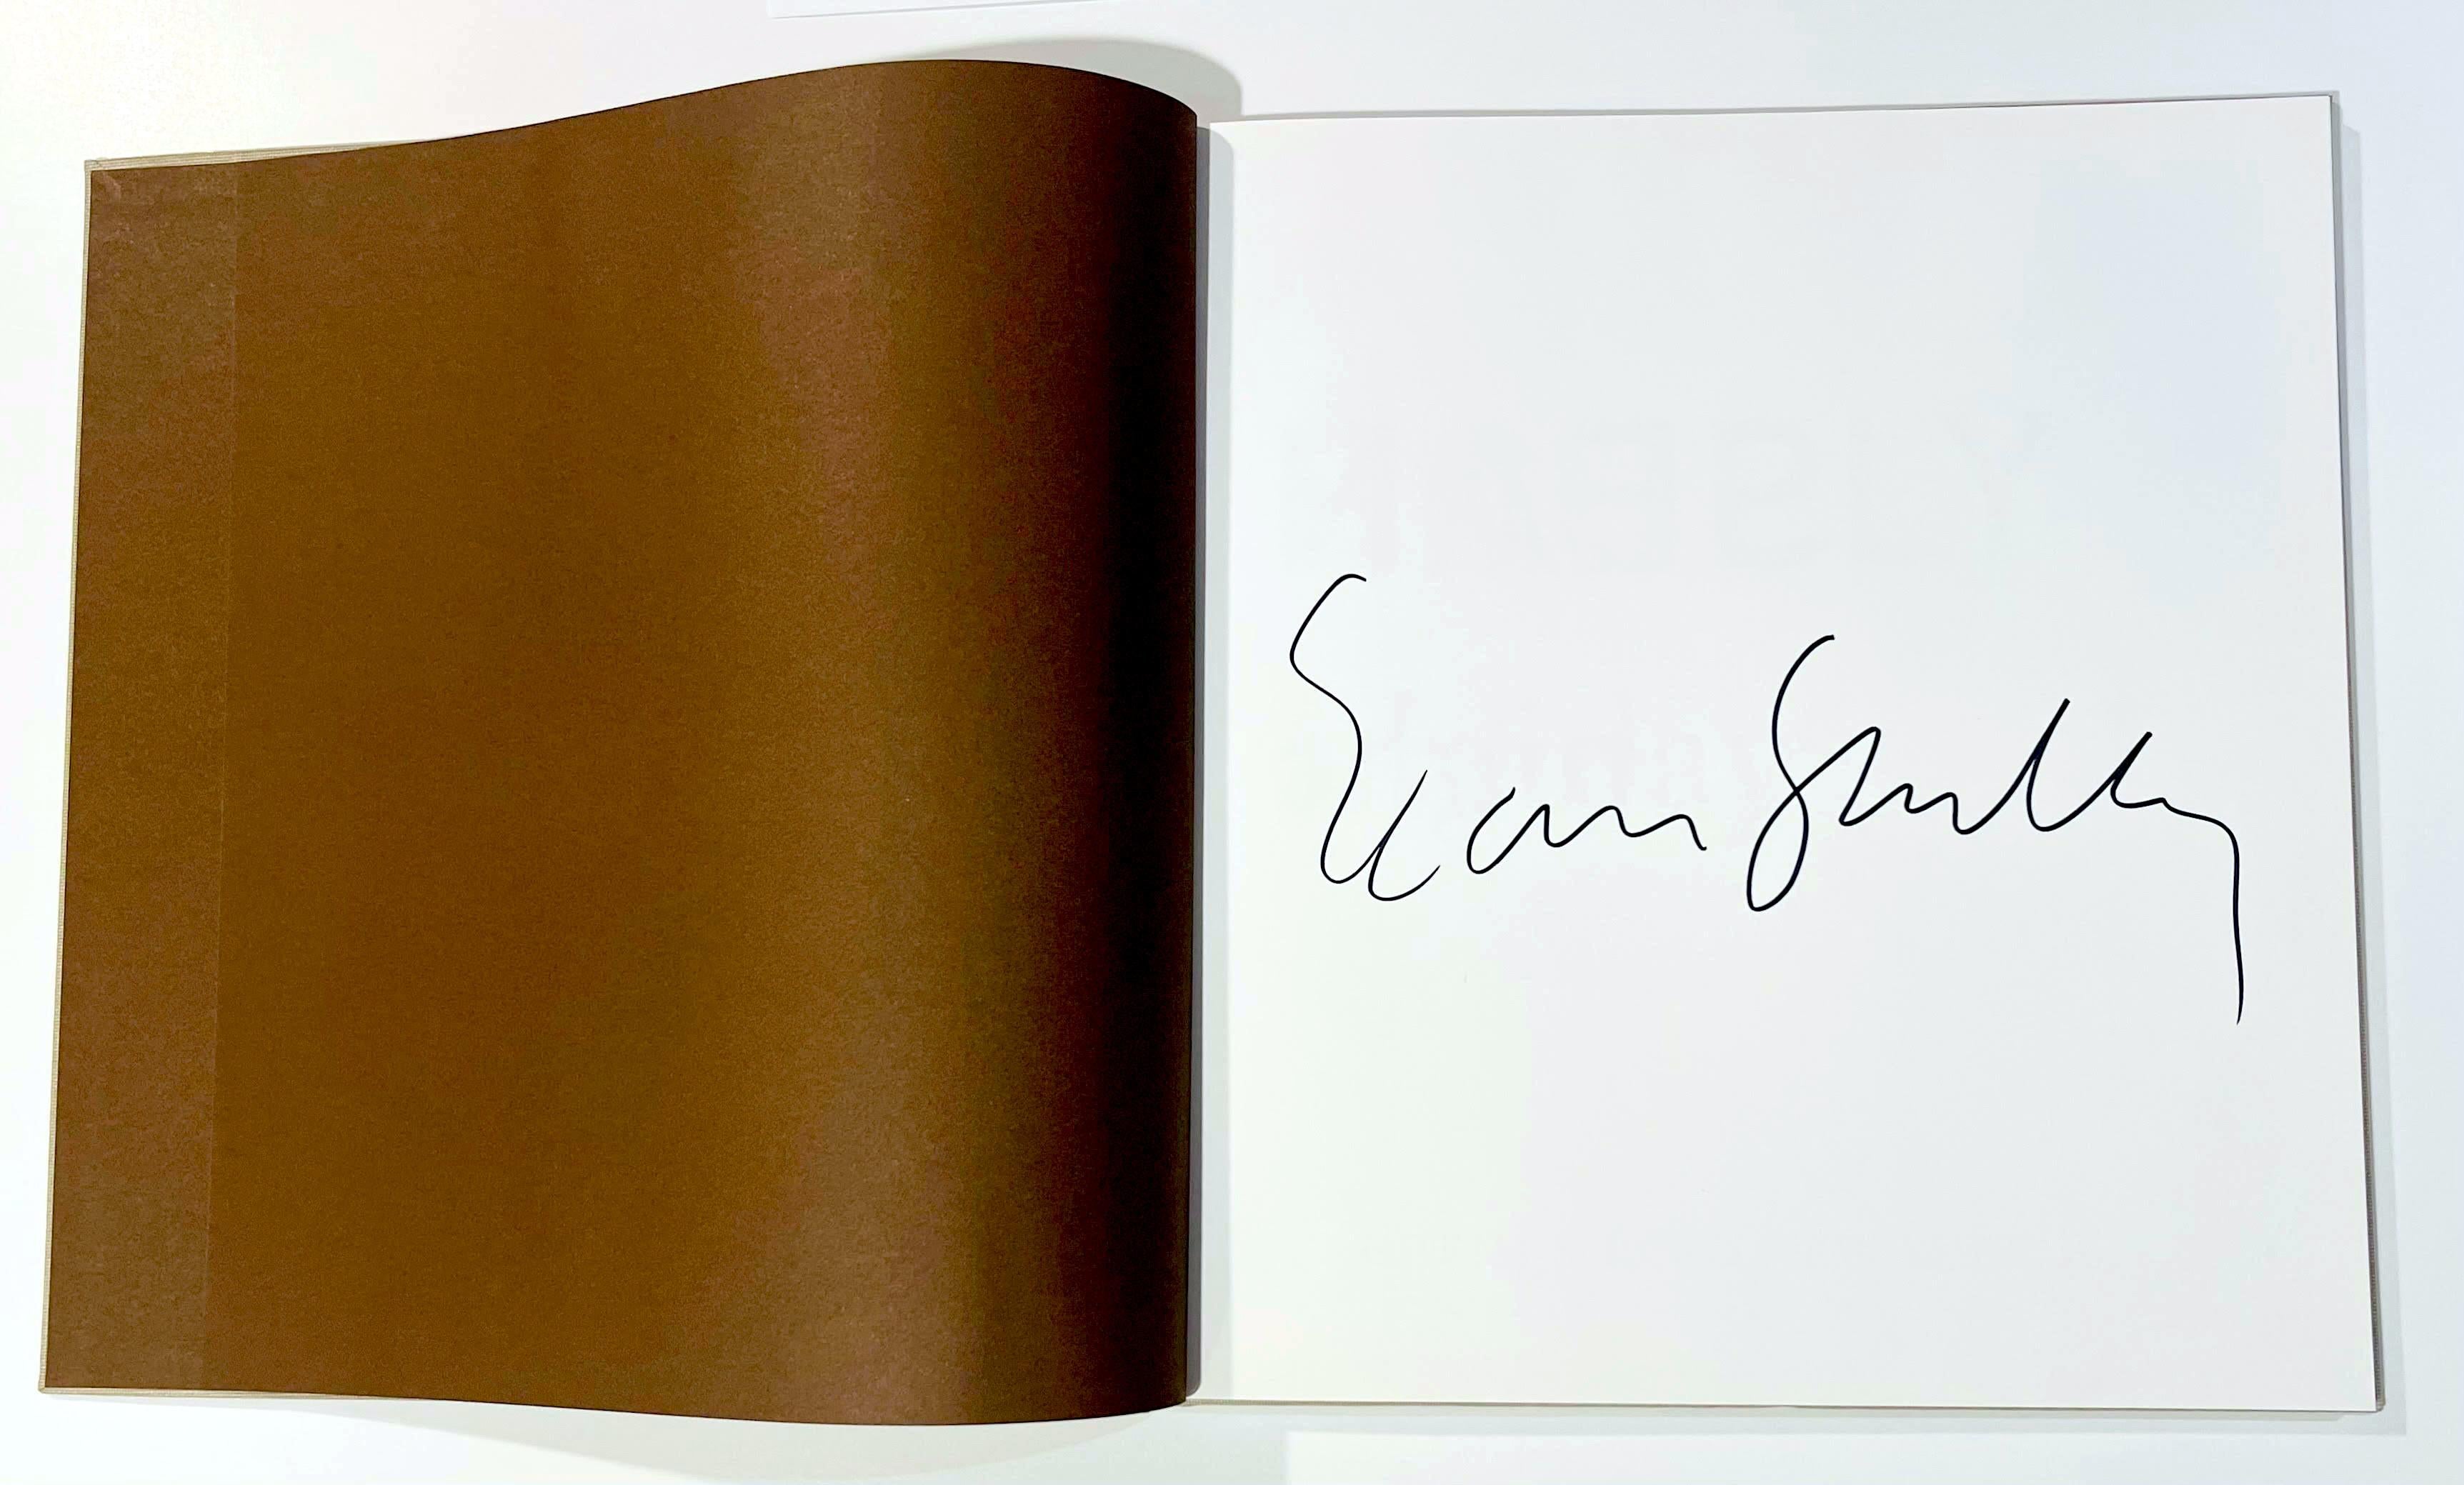 Sean Scully Night and Day (hardback monograph, hand signed by Sean Scully) For Sale 1